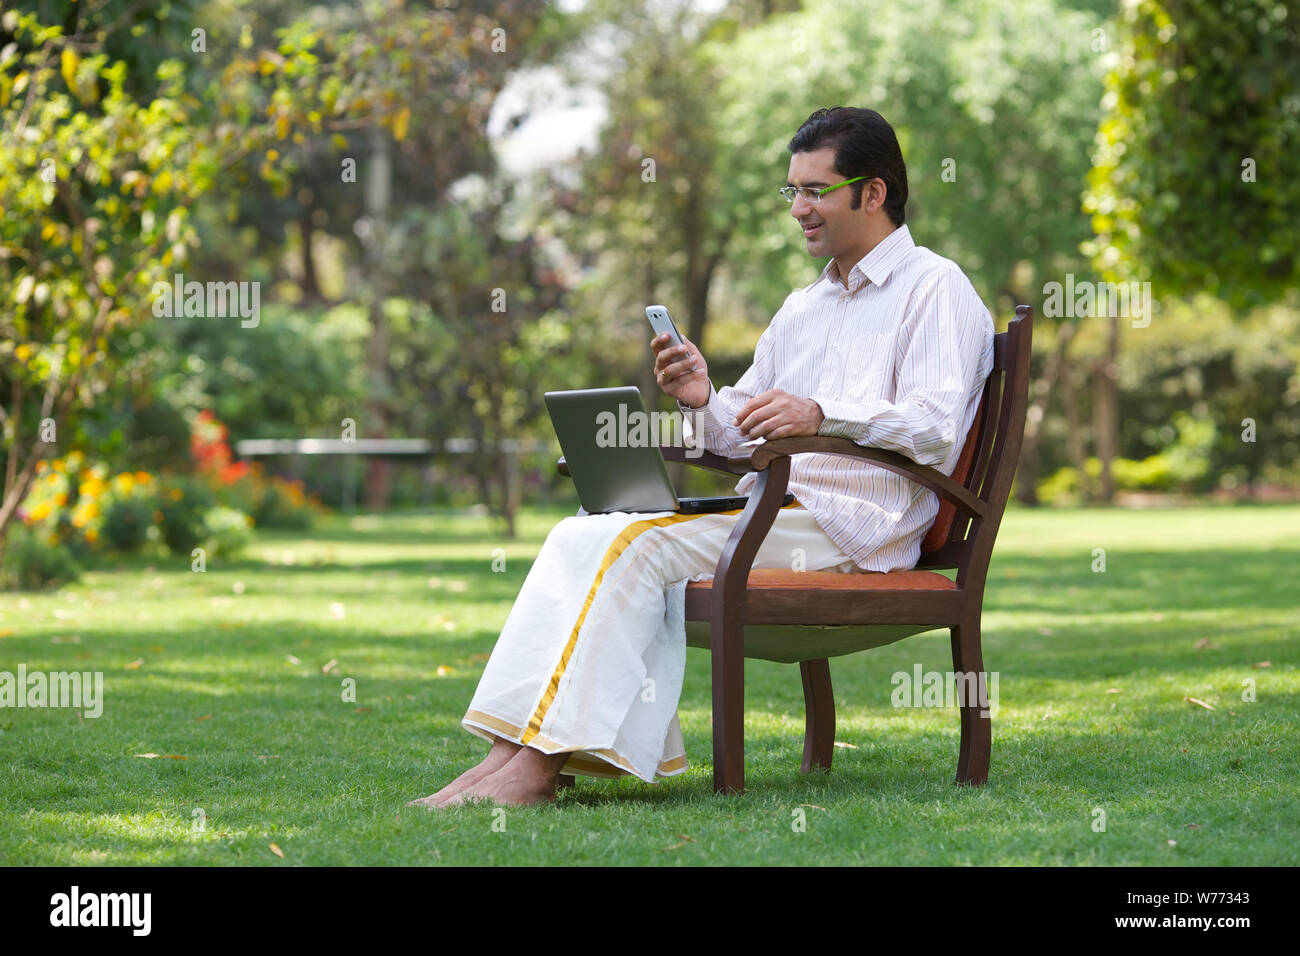 South Indian man text messaging on mobile phone and using laptop Stock Photo